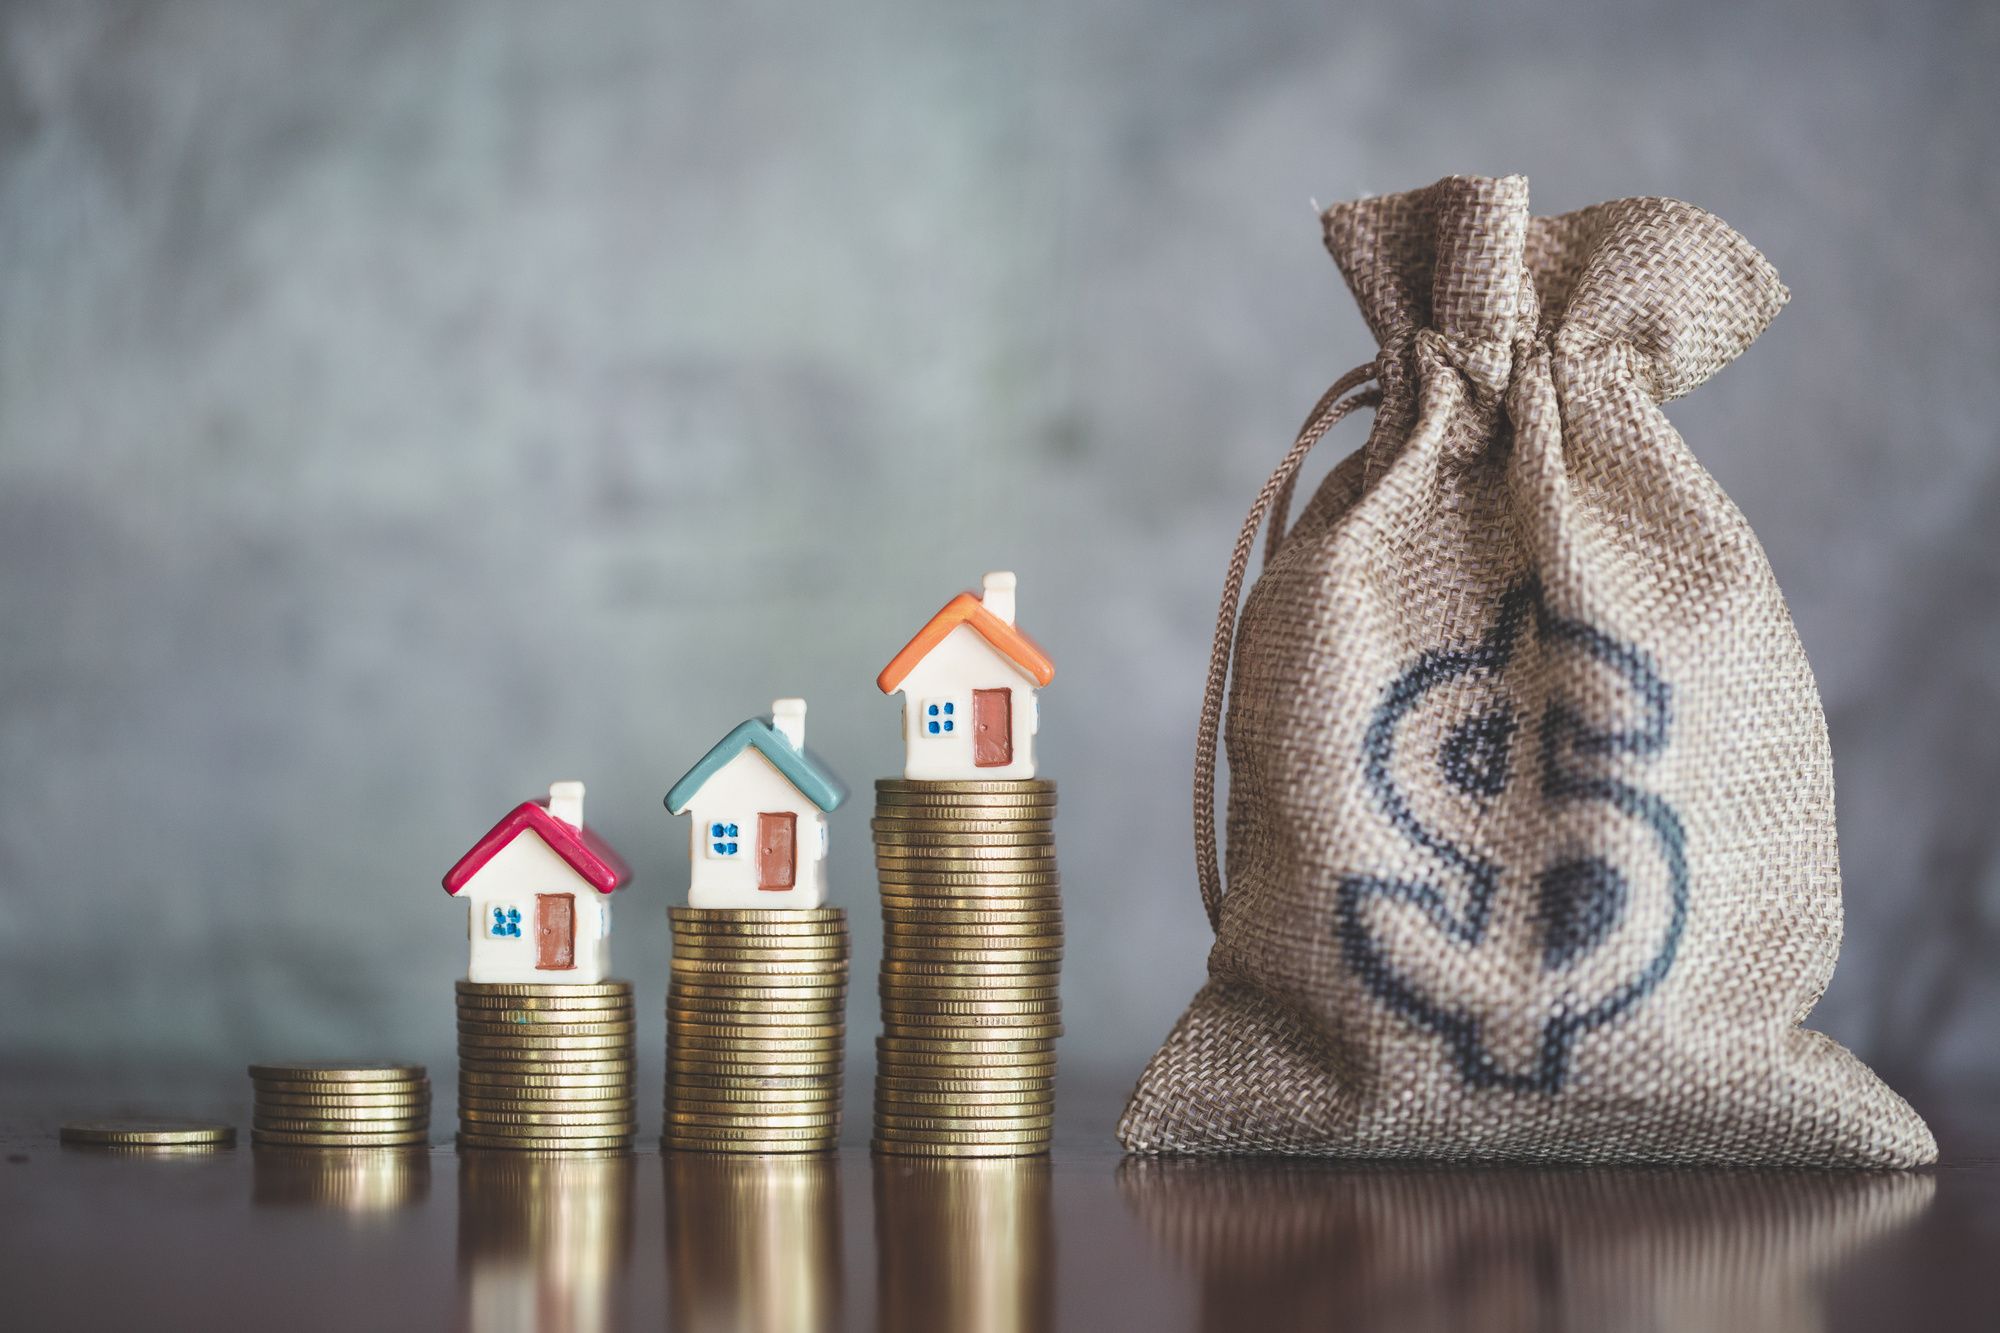 How to Measure a Property's Value and Performance